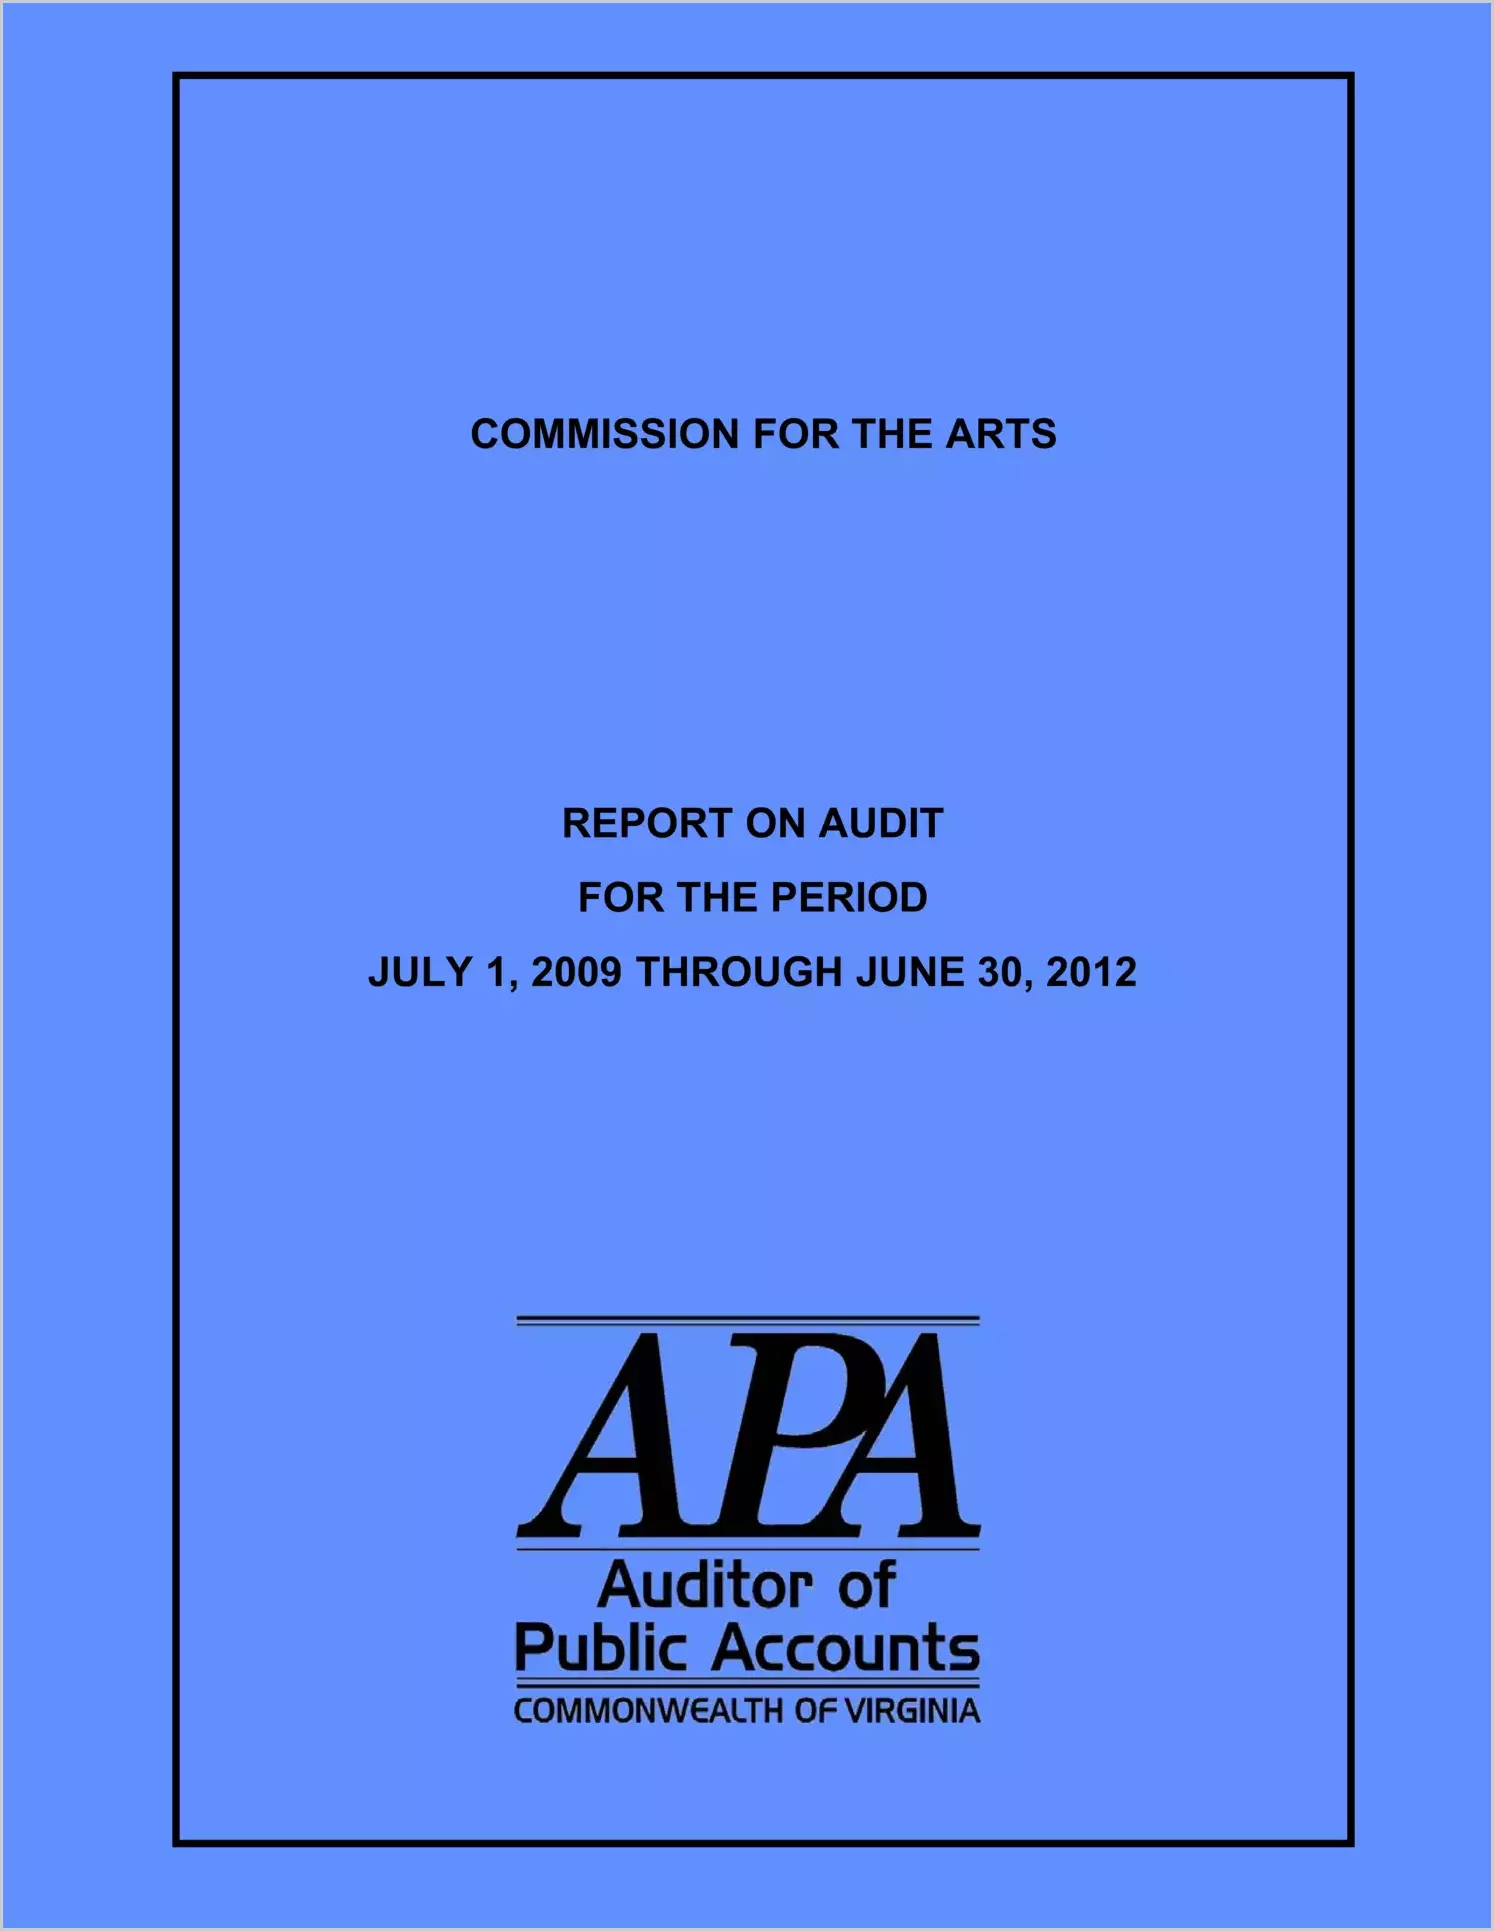 Virginia Commission for the Arts report on audit for the period July 1, 2009 through June 30, 2012